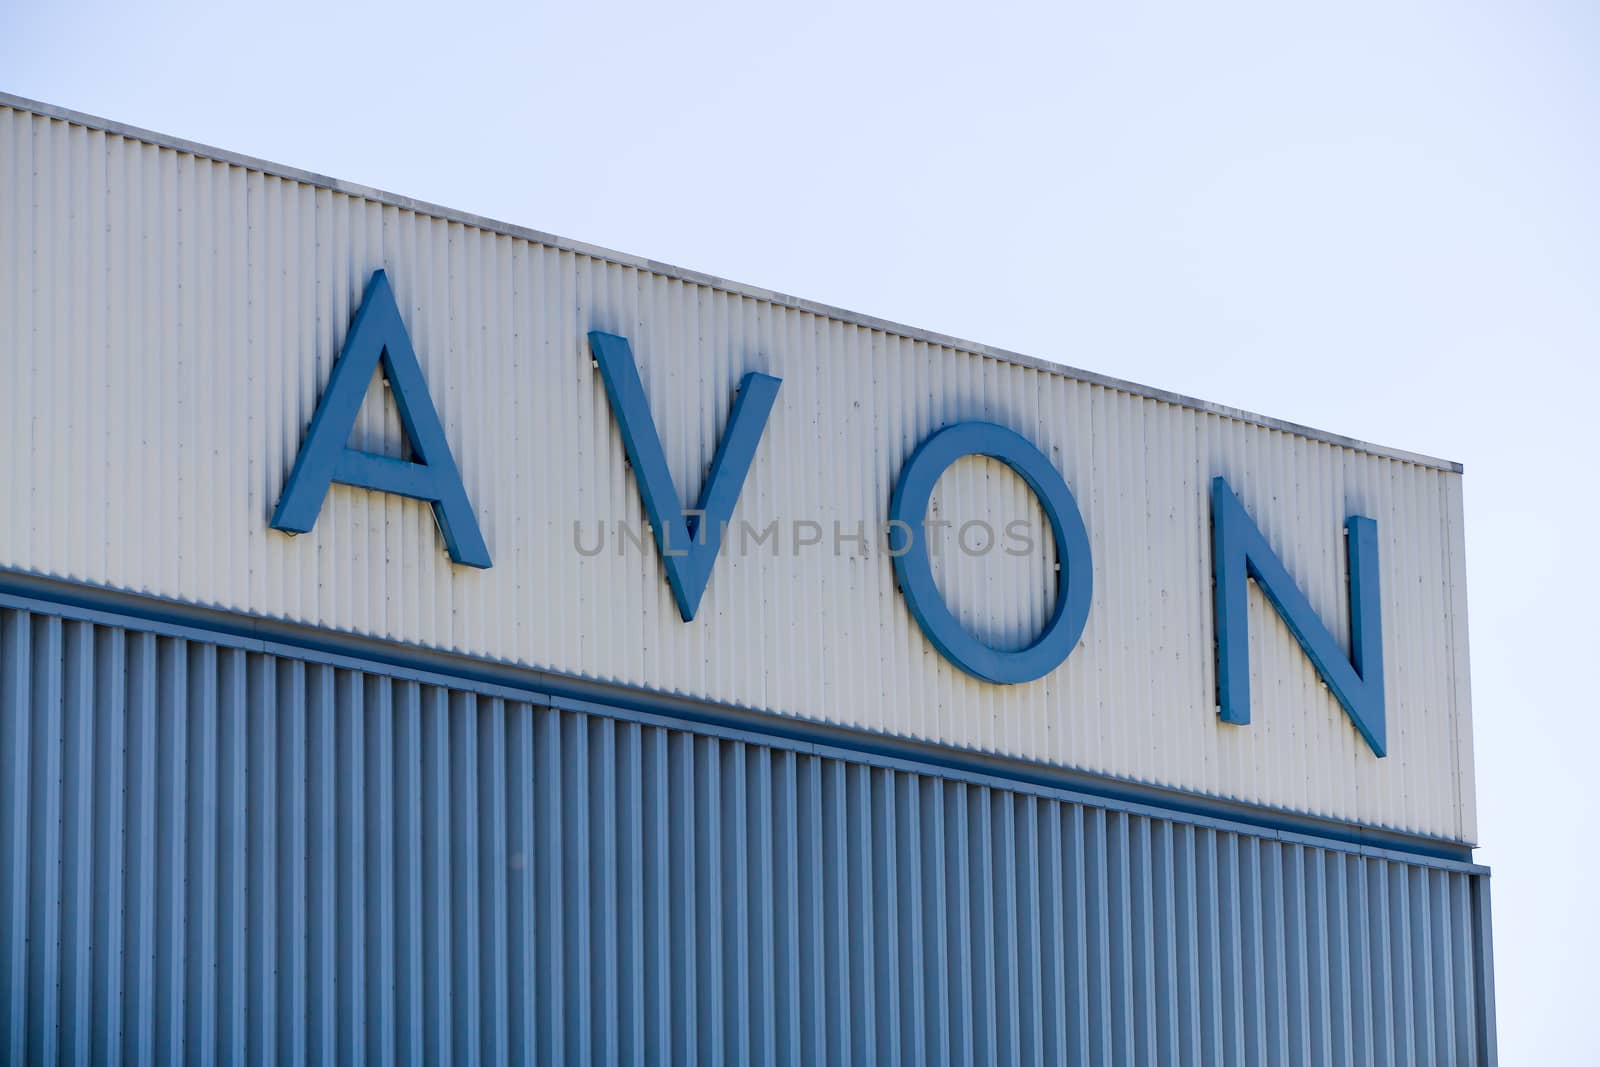 Avon Corporation Distribution Center and Logo by wolterk